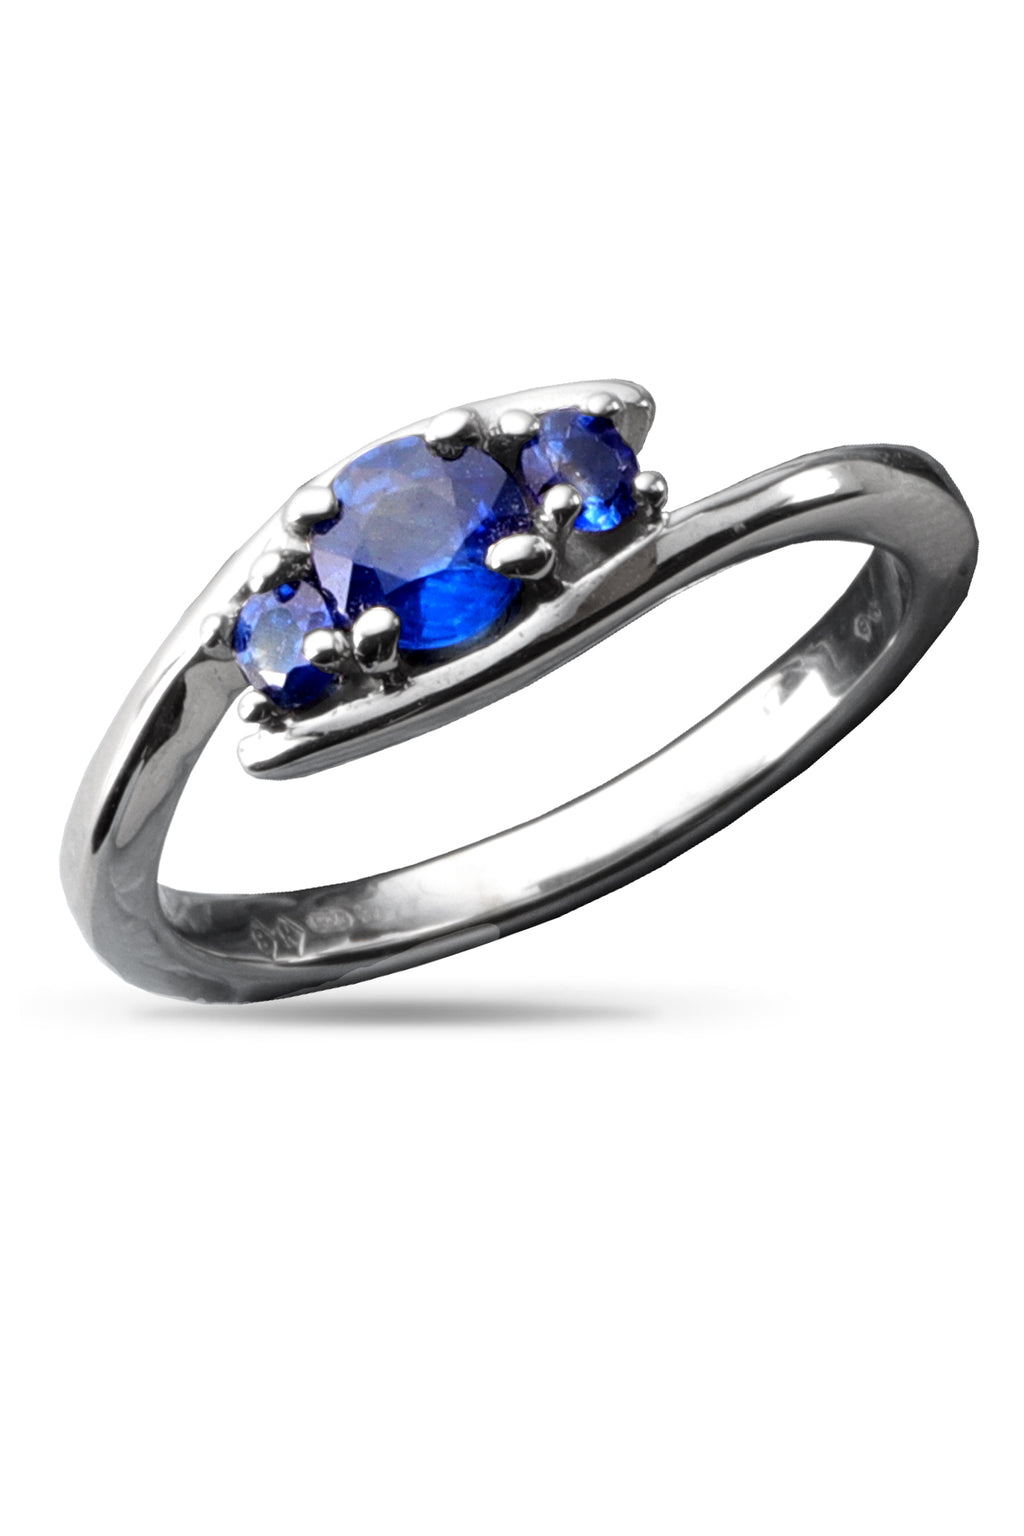 9ct White Gold Ring 3 Sapphires